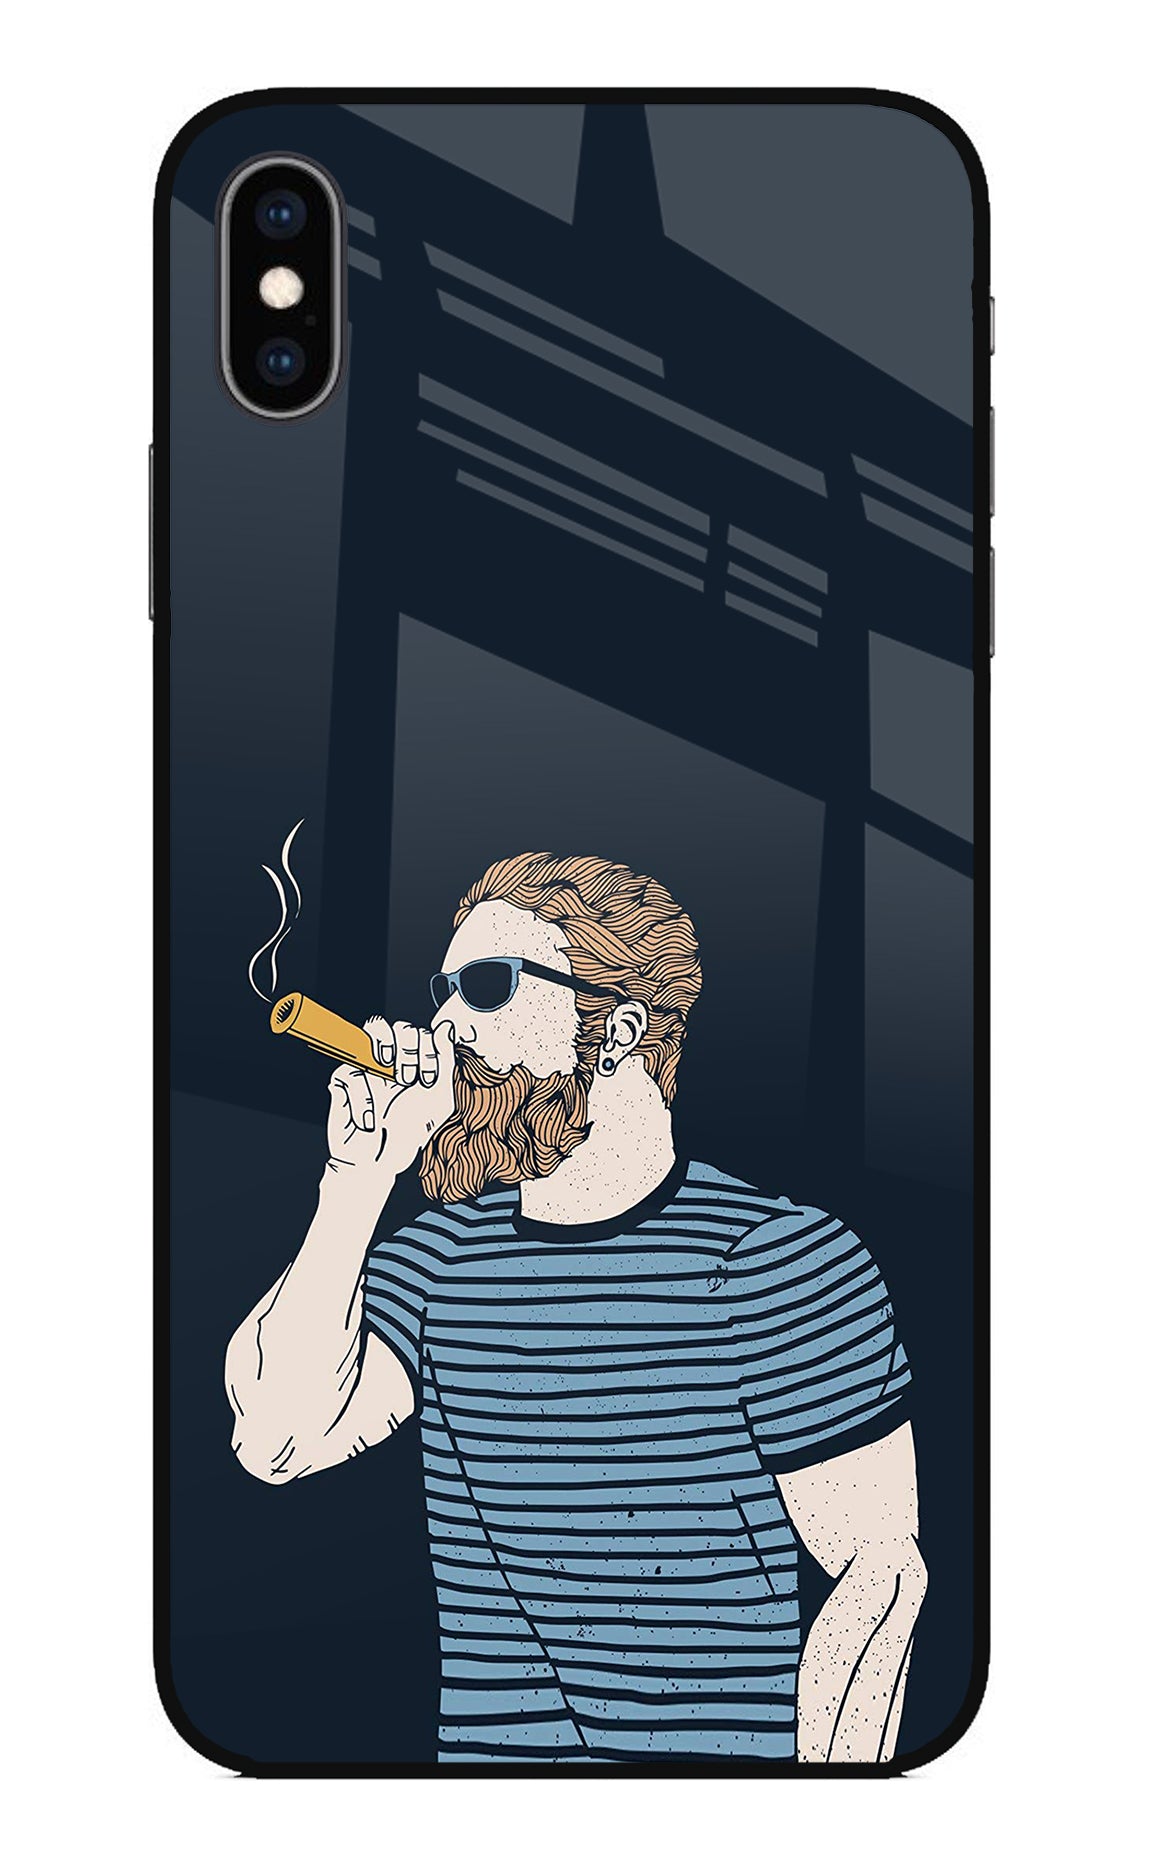 Smoking iPhone XS Max Back Cover